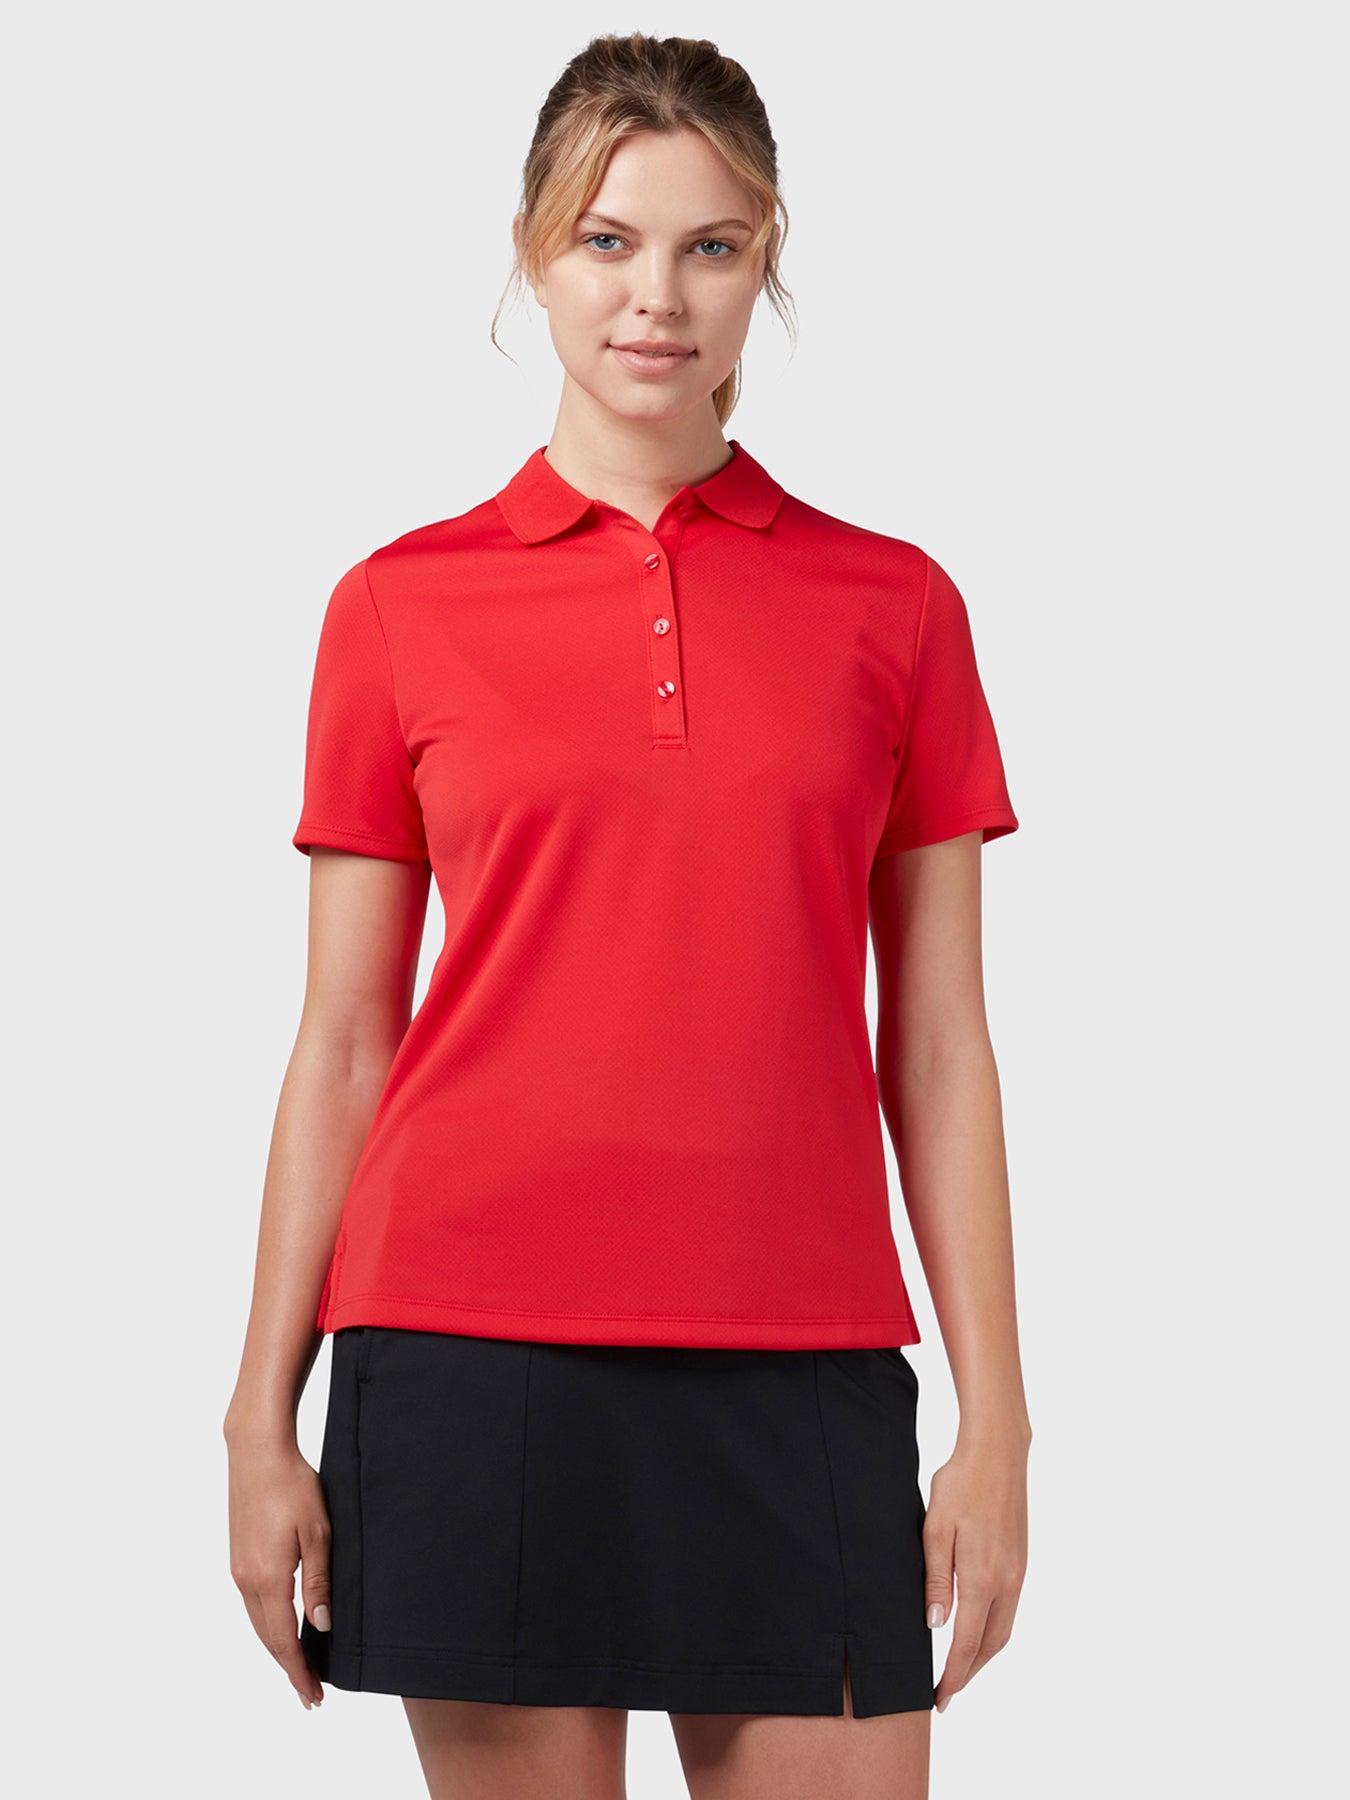 View Swing Tech Womens Polo In True Red information